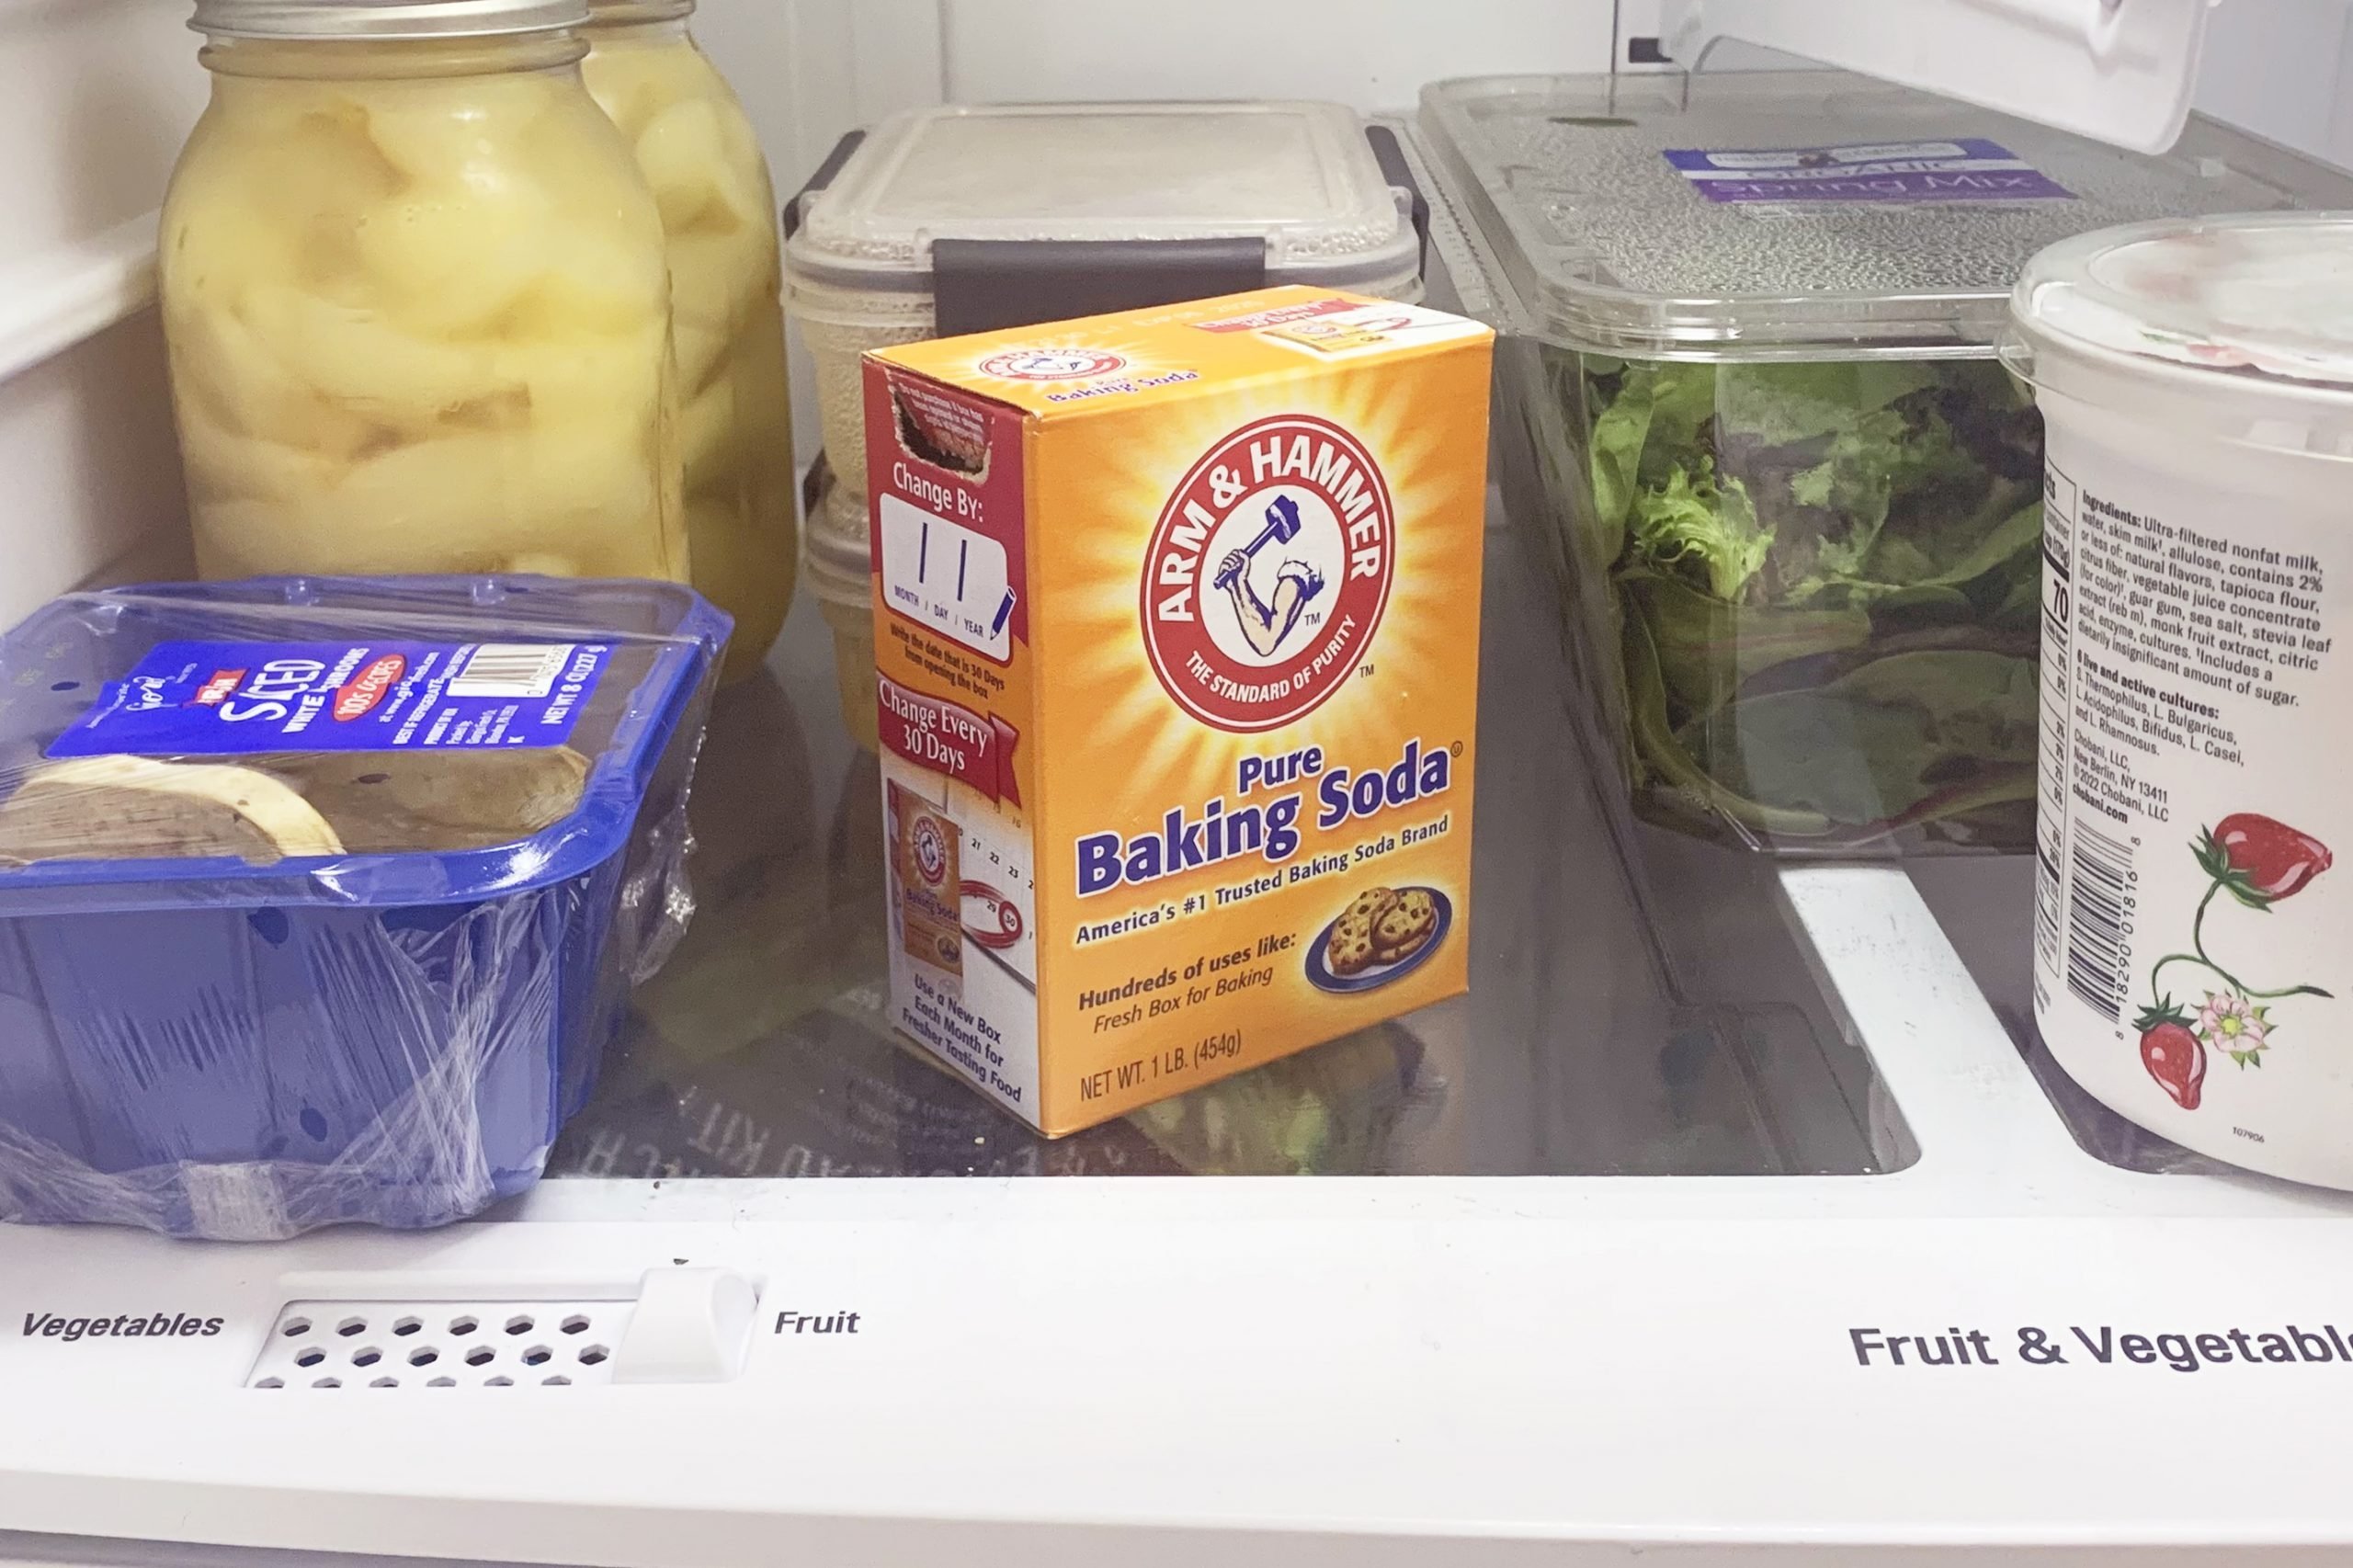 Does Your Fridge Water Taste Bad? Here's How to Fix It